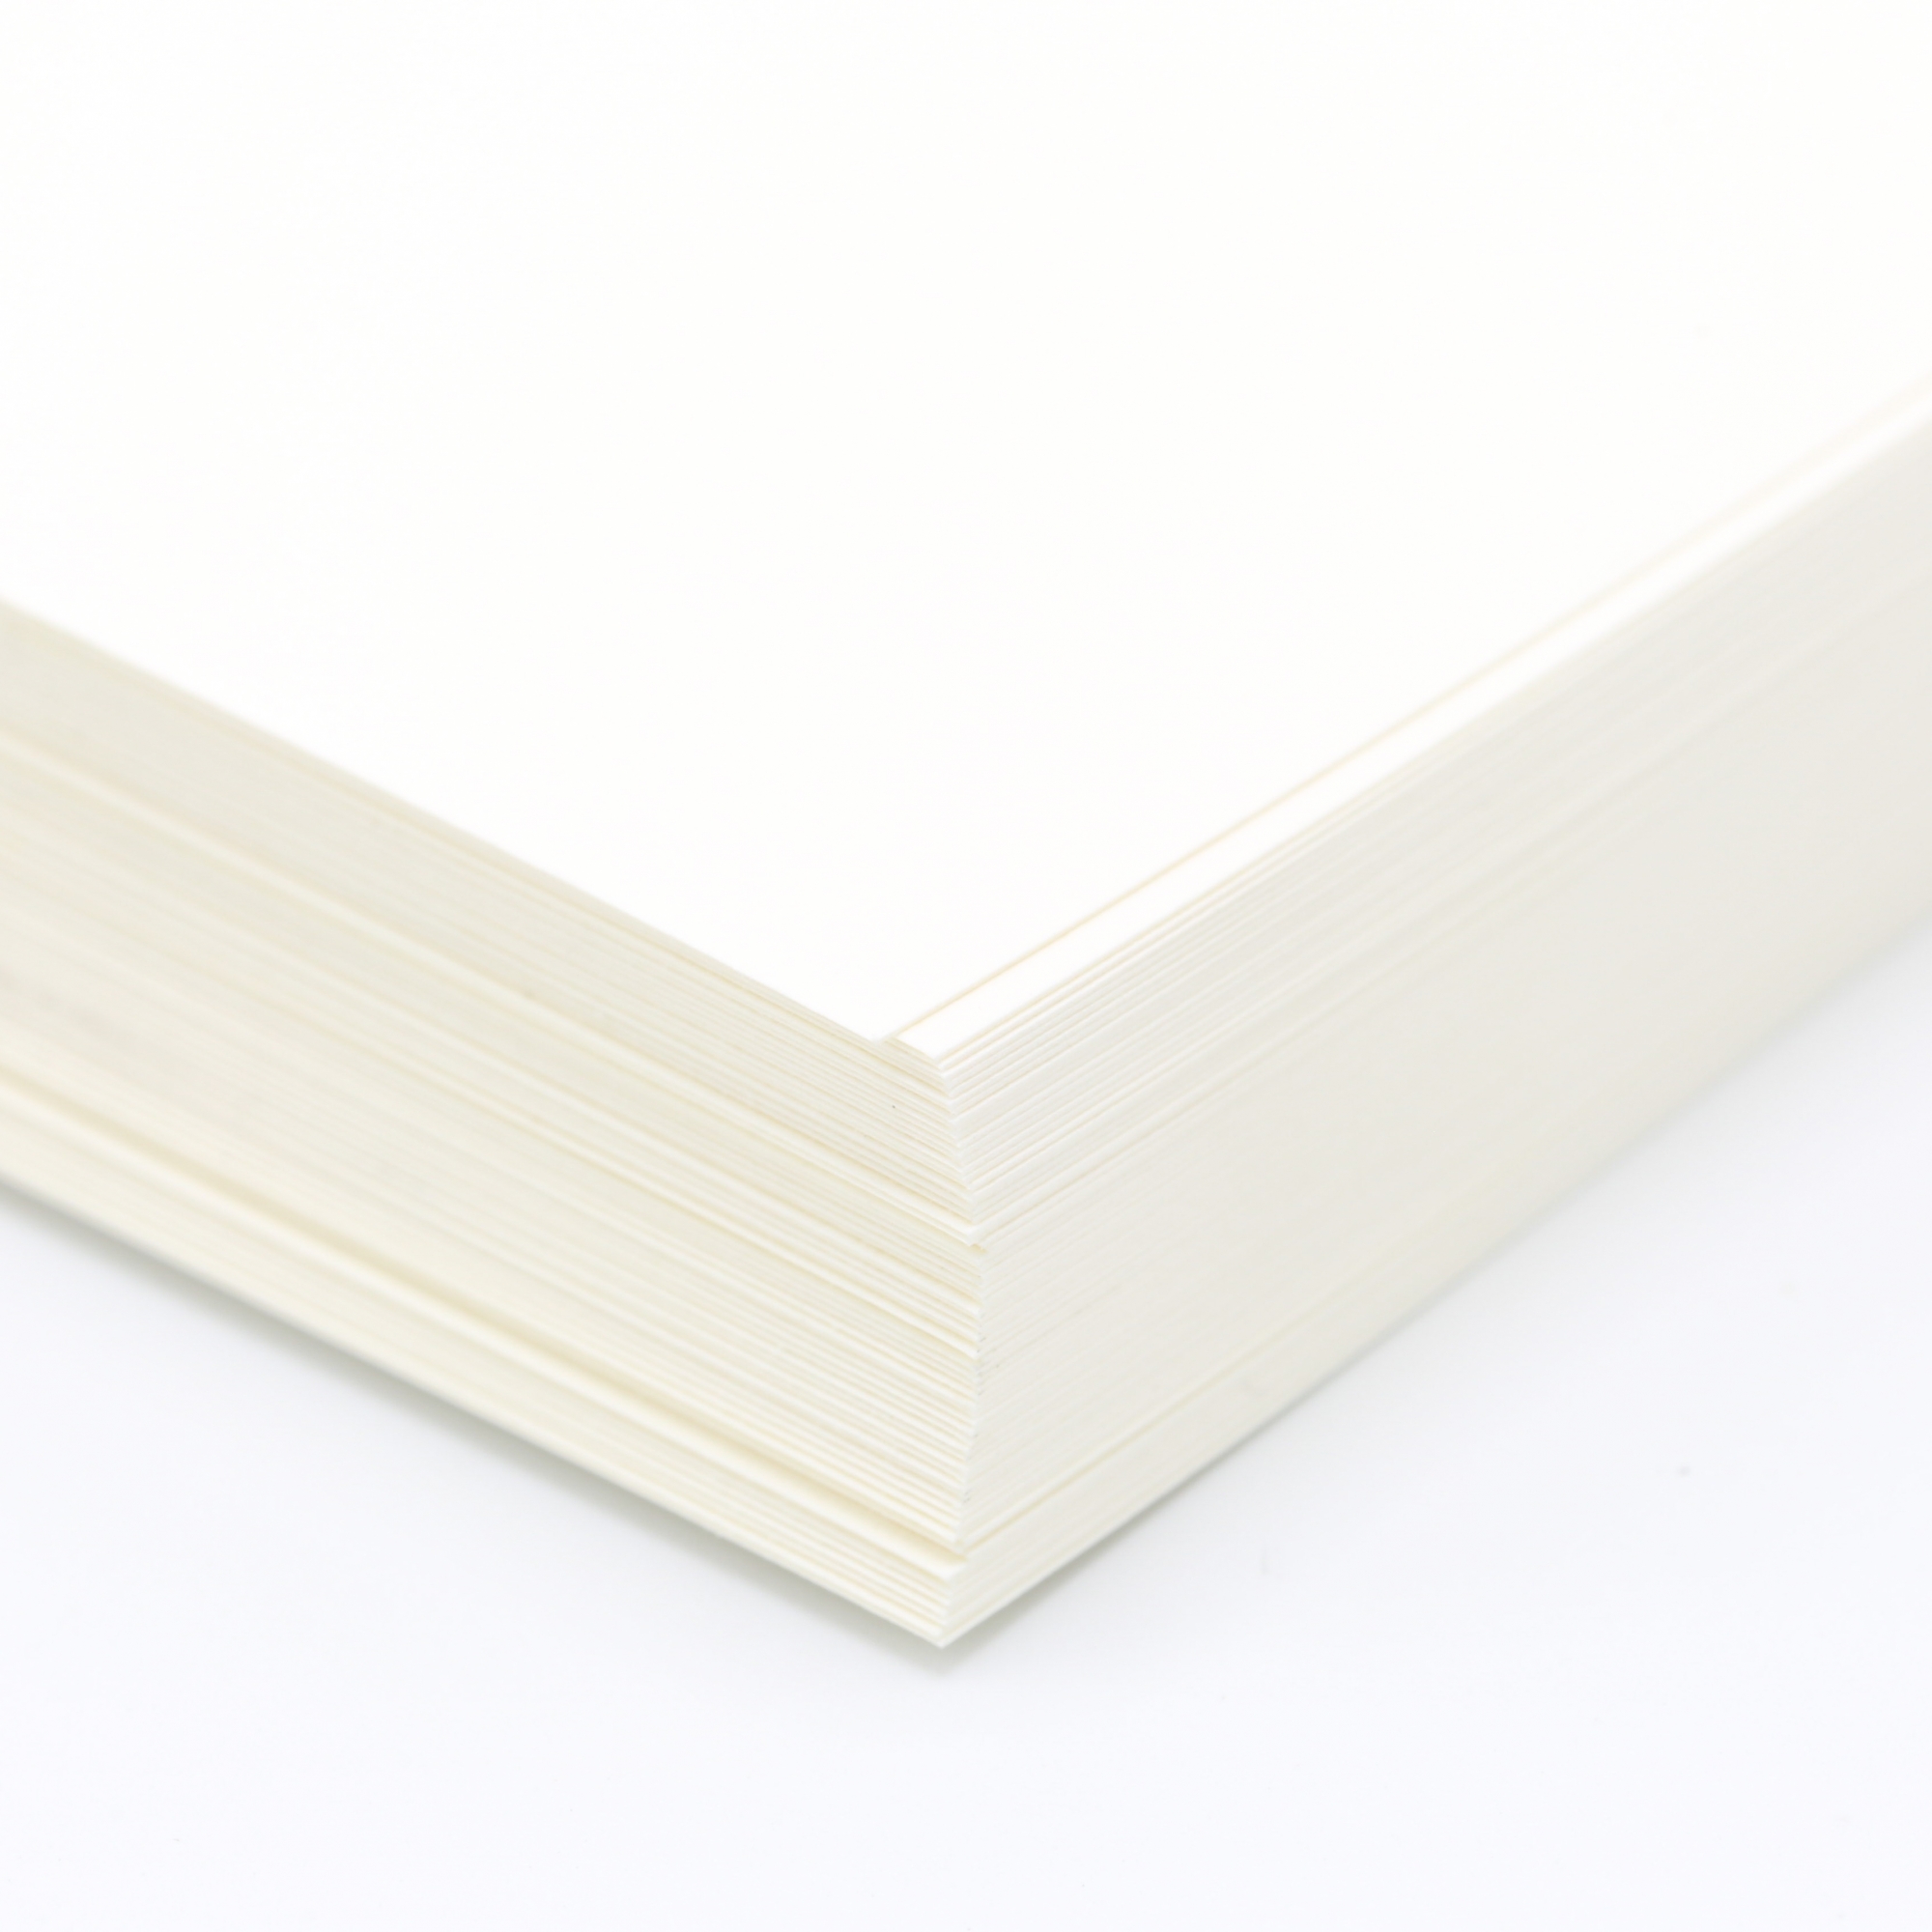 Classic Linen 80lb/120g Text Natural White 11x17 500/pkg, Paper,  Envelopes, Cardstock & Wide format, Quick shipping nationwide